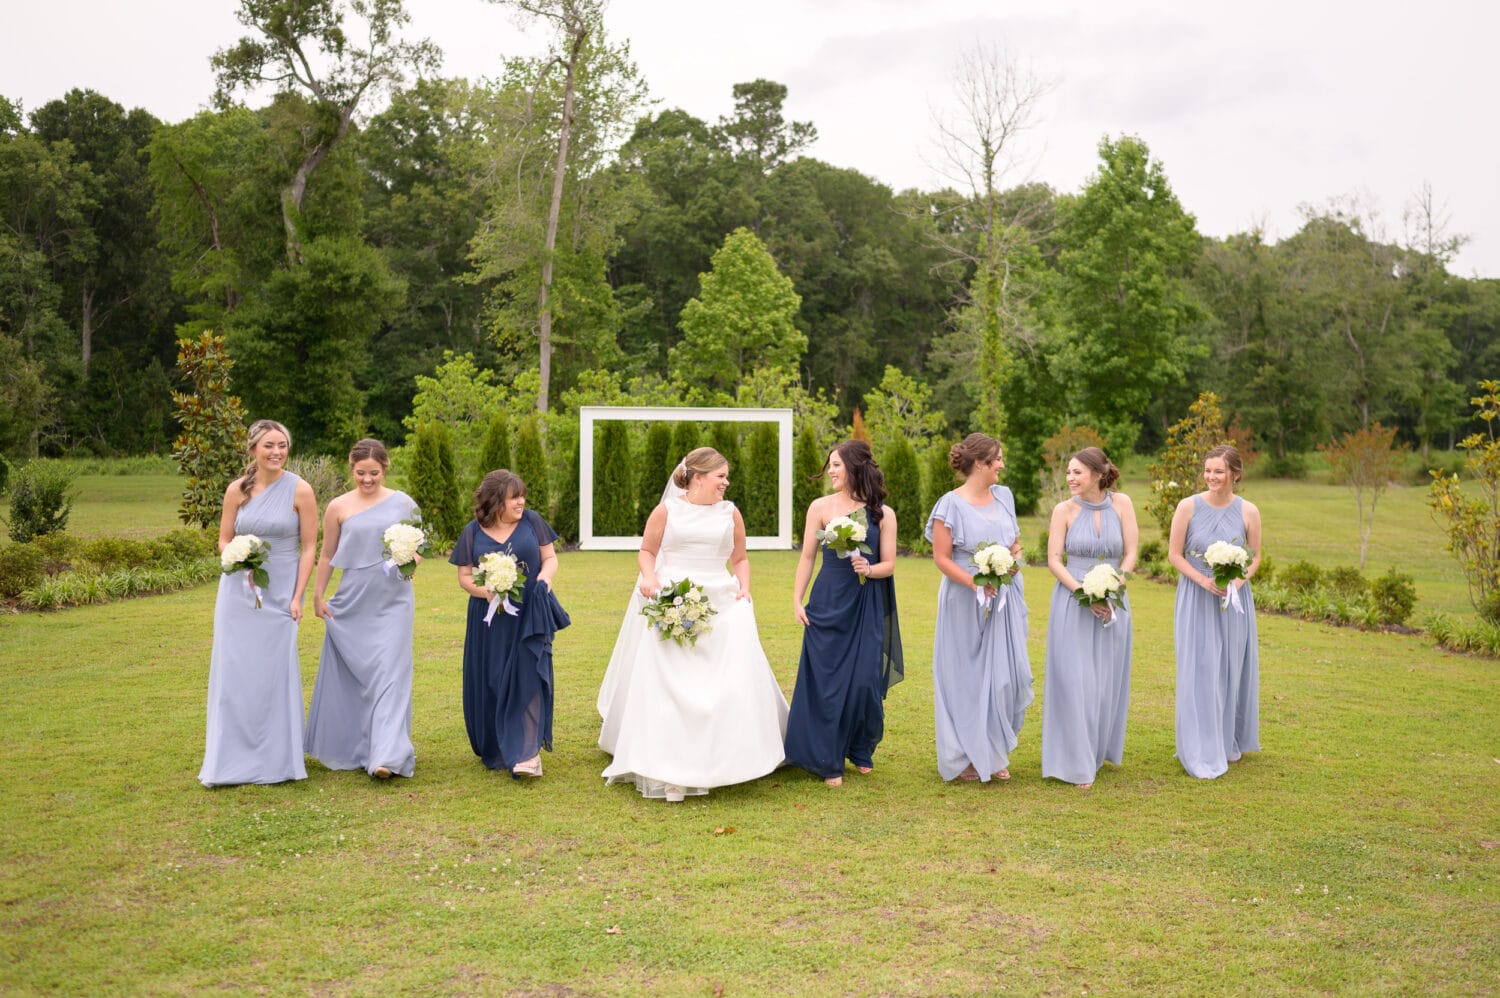 Bride and bridesmaids in front of the frame on the lawn - The Venue at White Oaks Farm